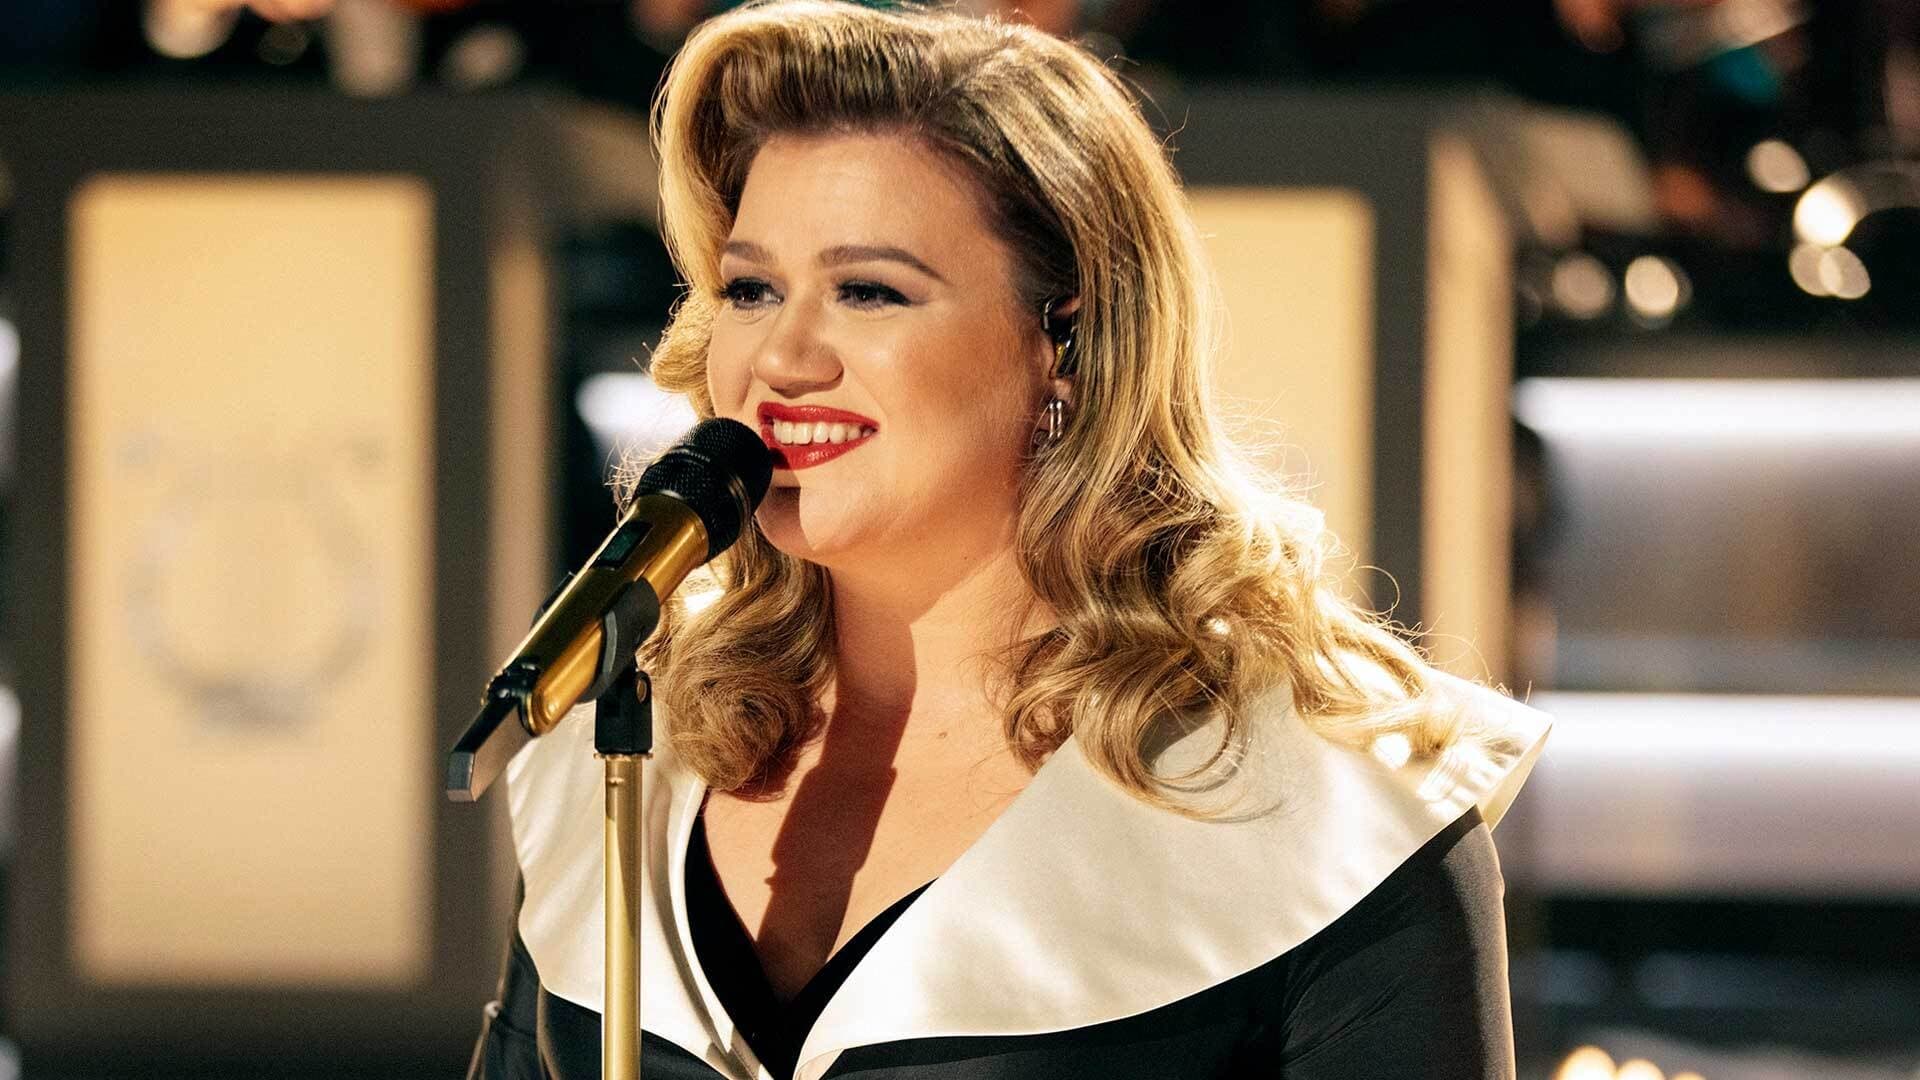 Kelly Clarkson Presents: When Christmas Comes Around (2021)